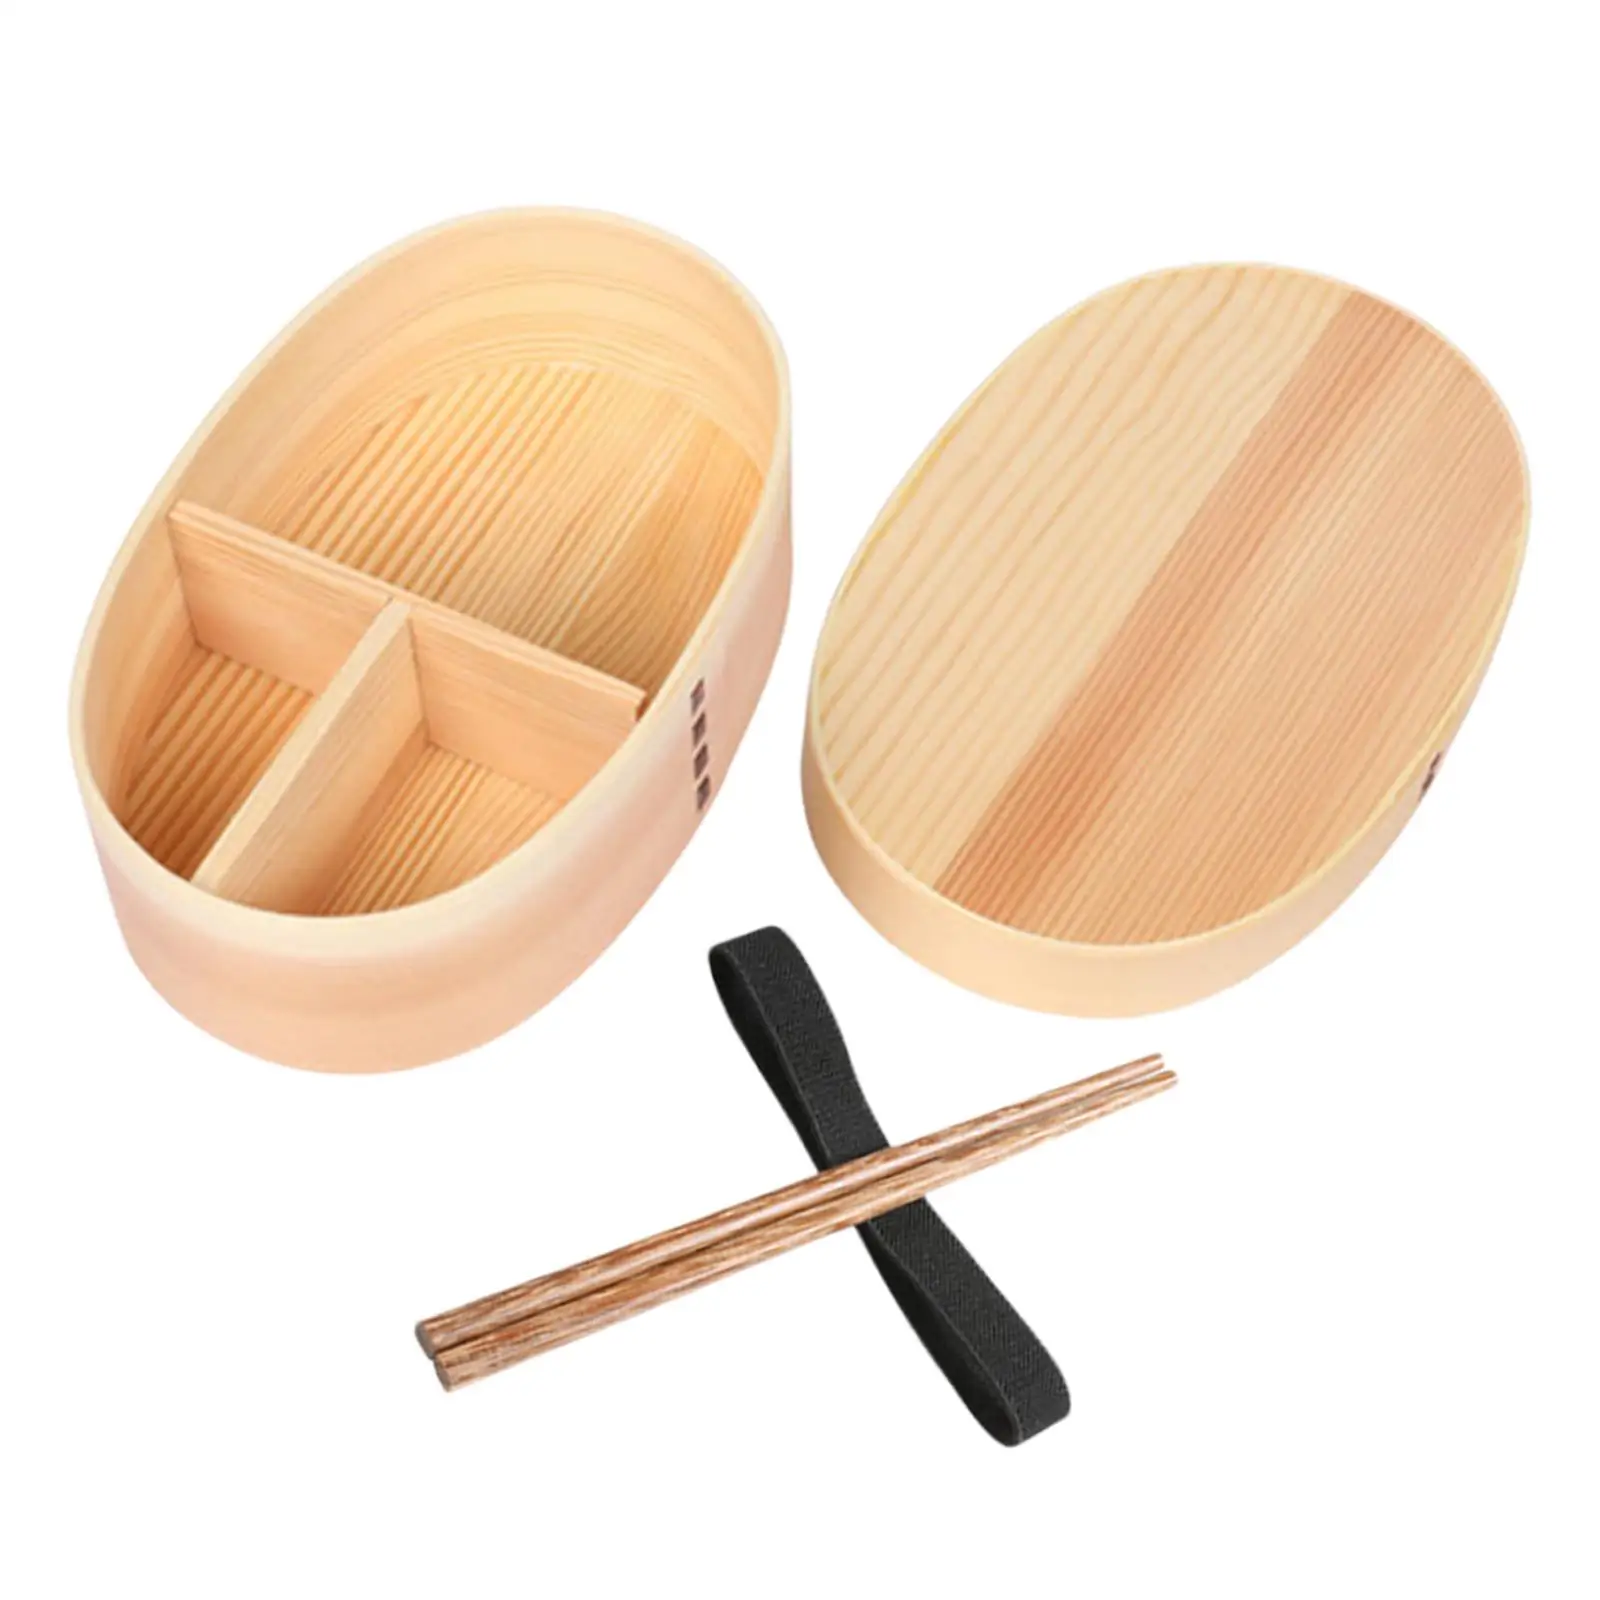 Japanese Style Wooden Lunch Box with Chopsticks, Traditional Food Container